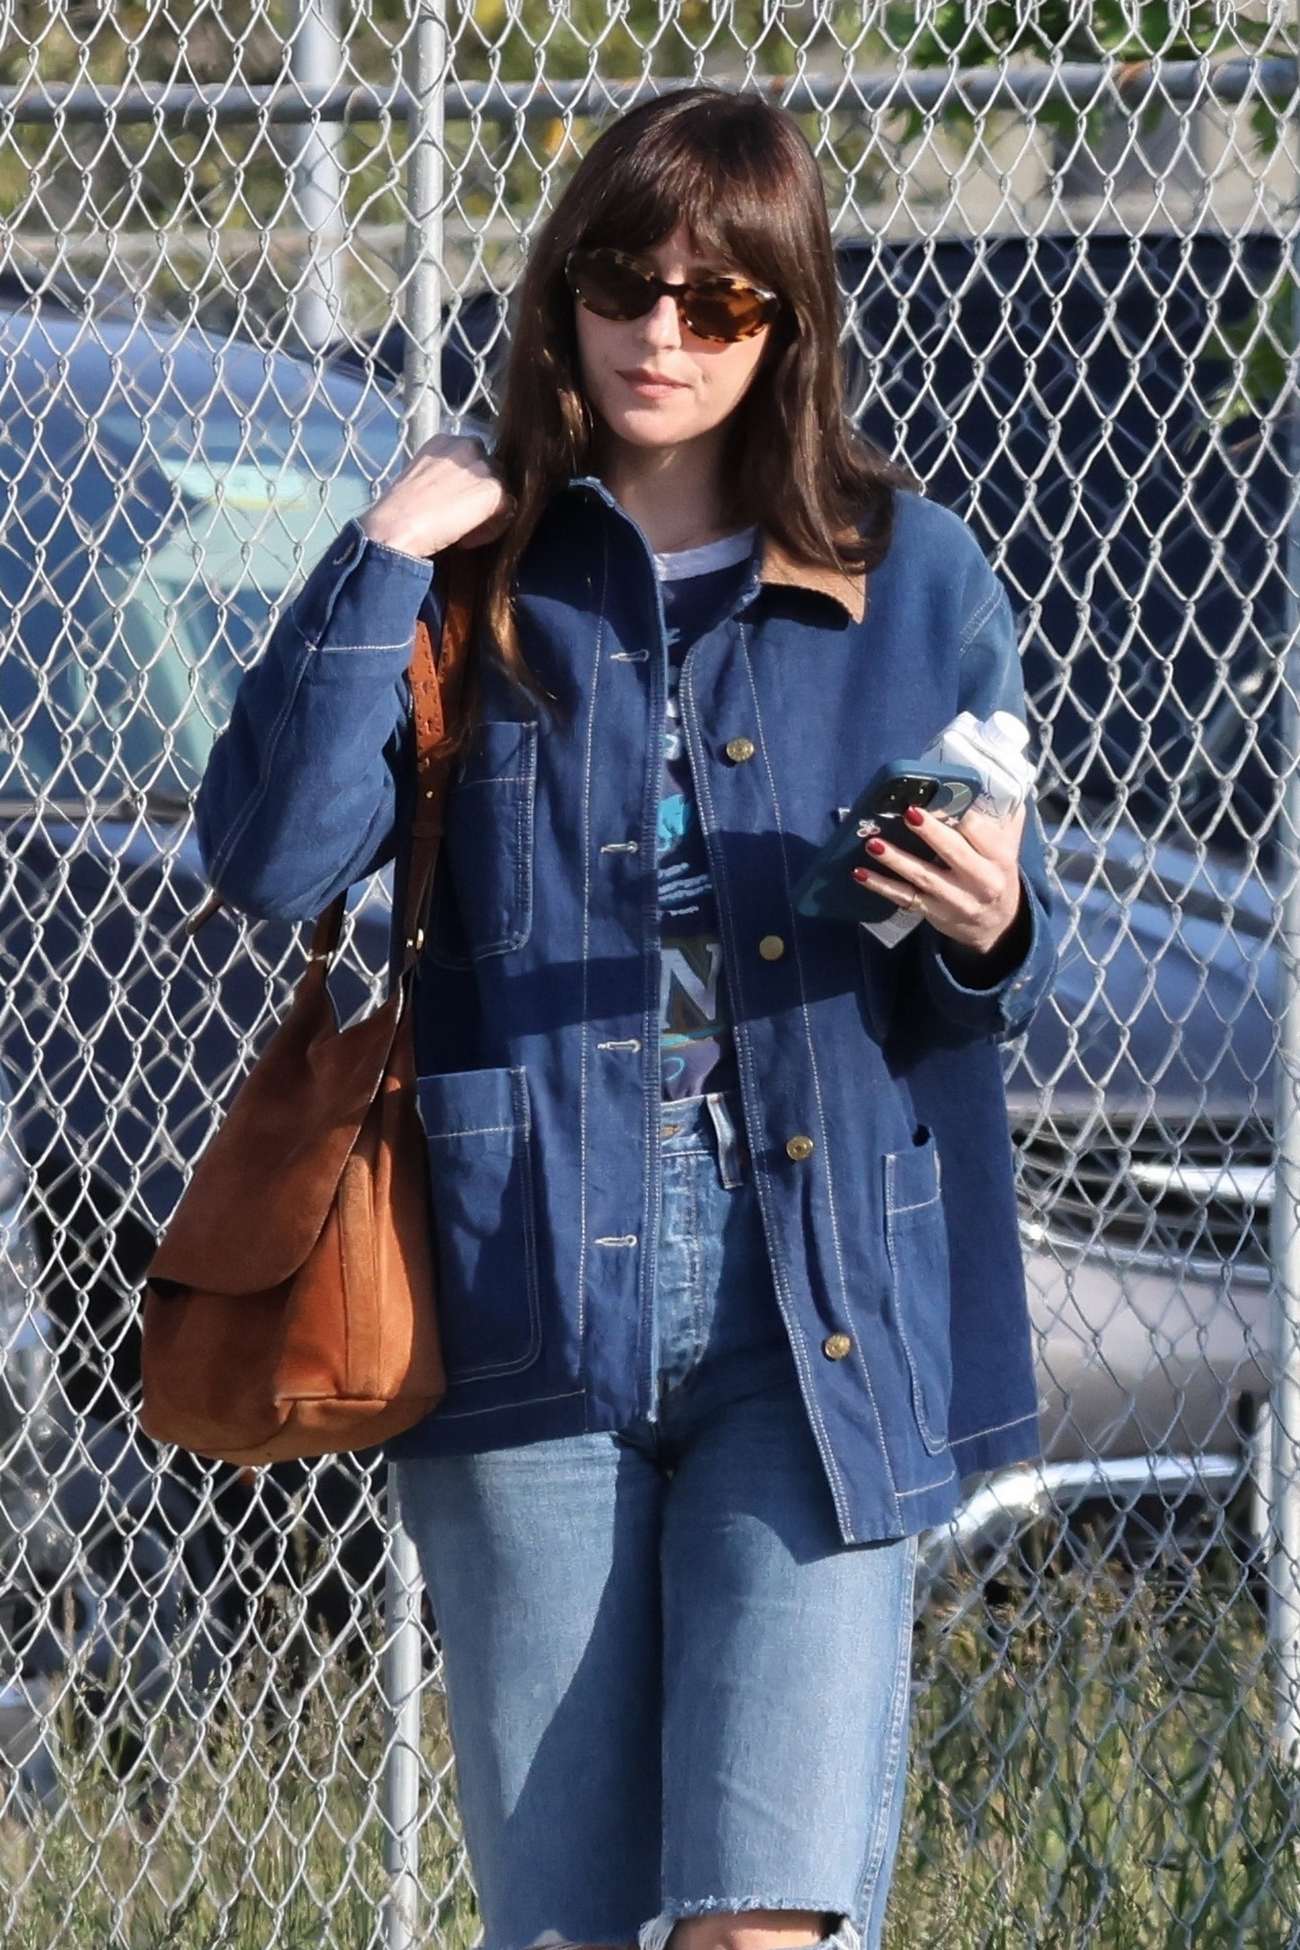 Dakota_Johnson_-_is_seen_out_and_about_running_errands_in_Los_Angeles2C_California__0513202305.jpg